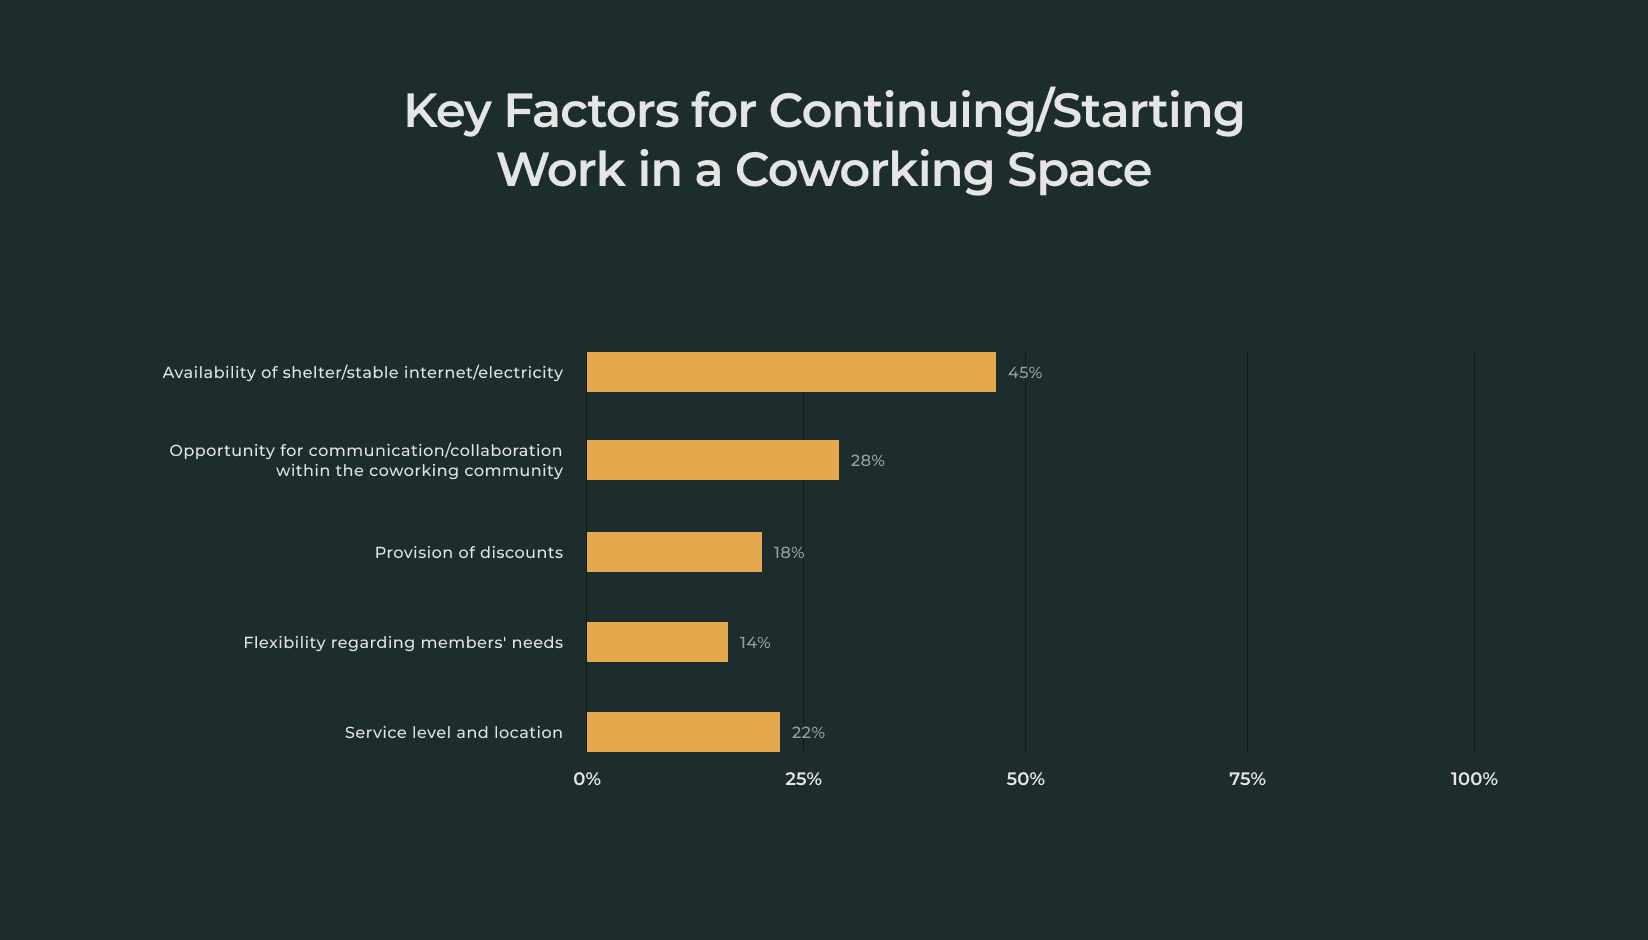 Key factors for continuing/starting work in a coworking space - Spacebring survey